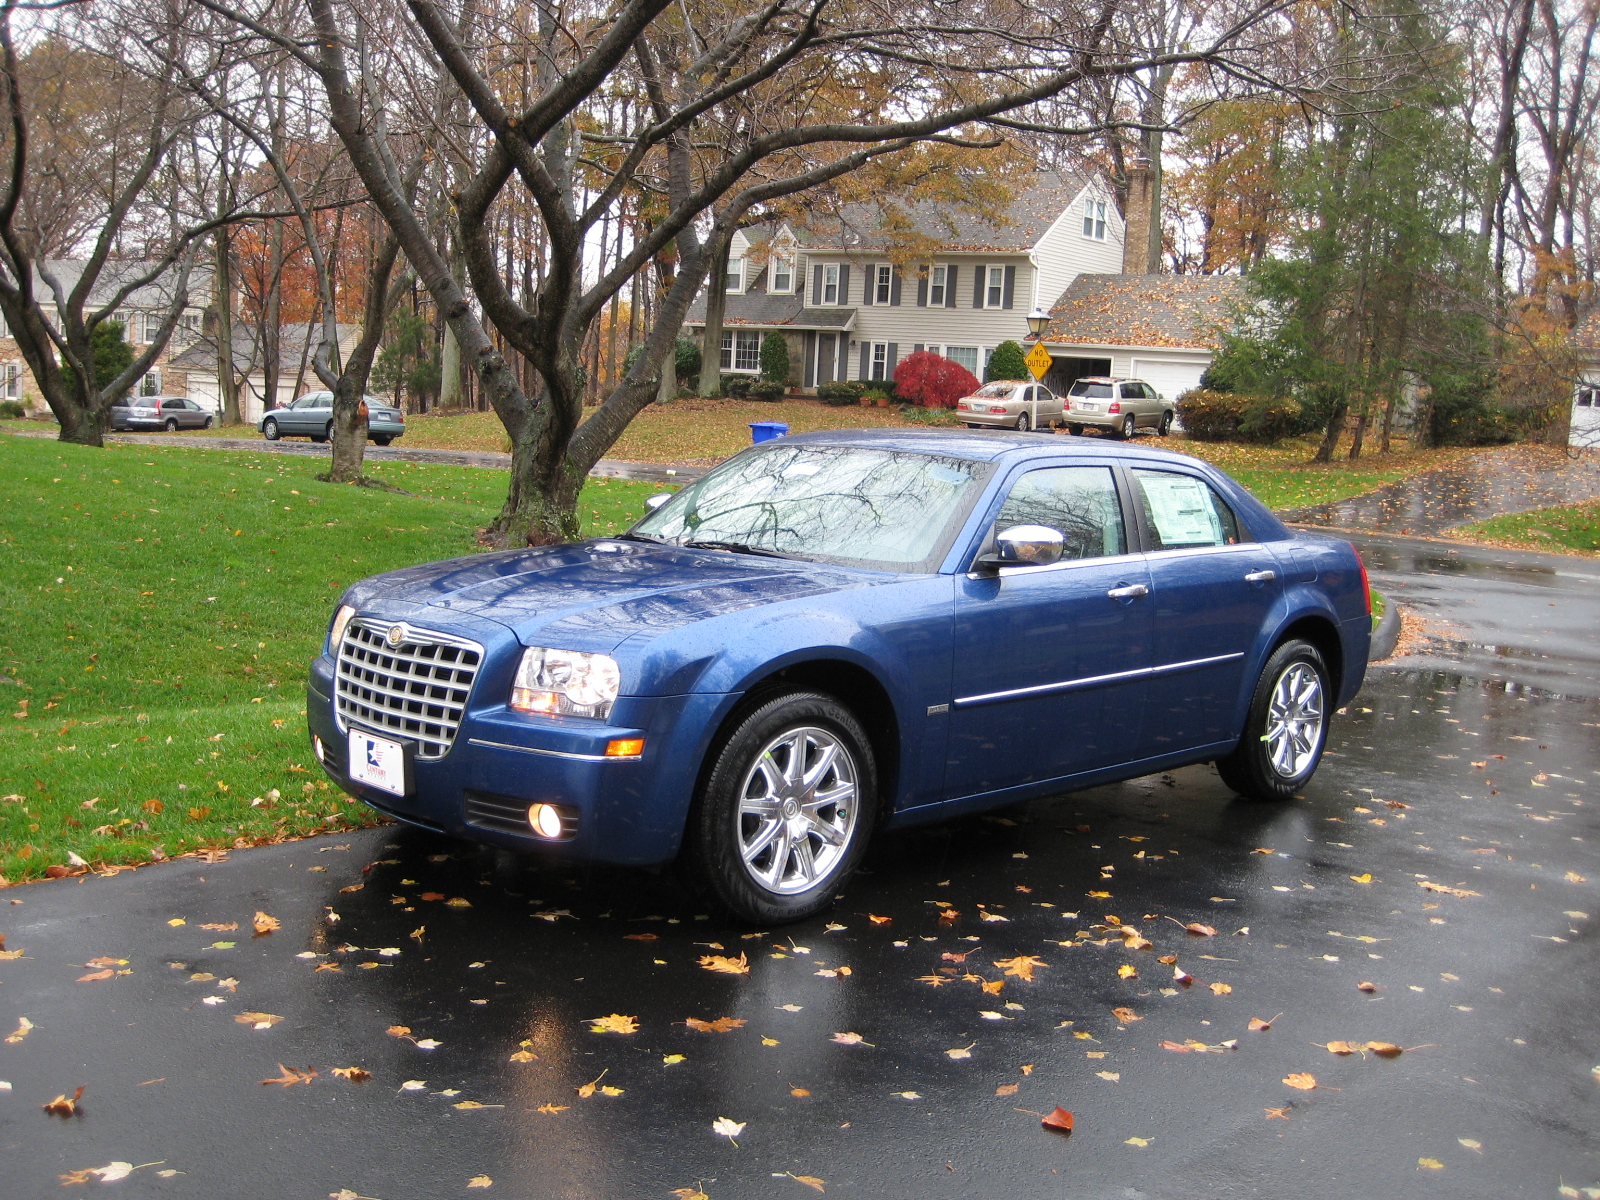 The Chrysler 300 started its life in 2005, the successor to the 300M and 